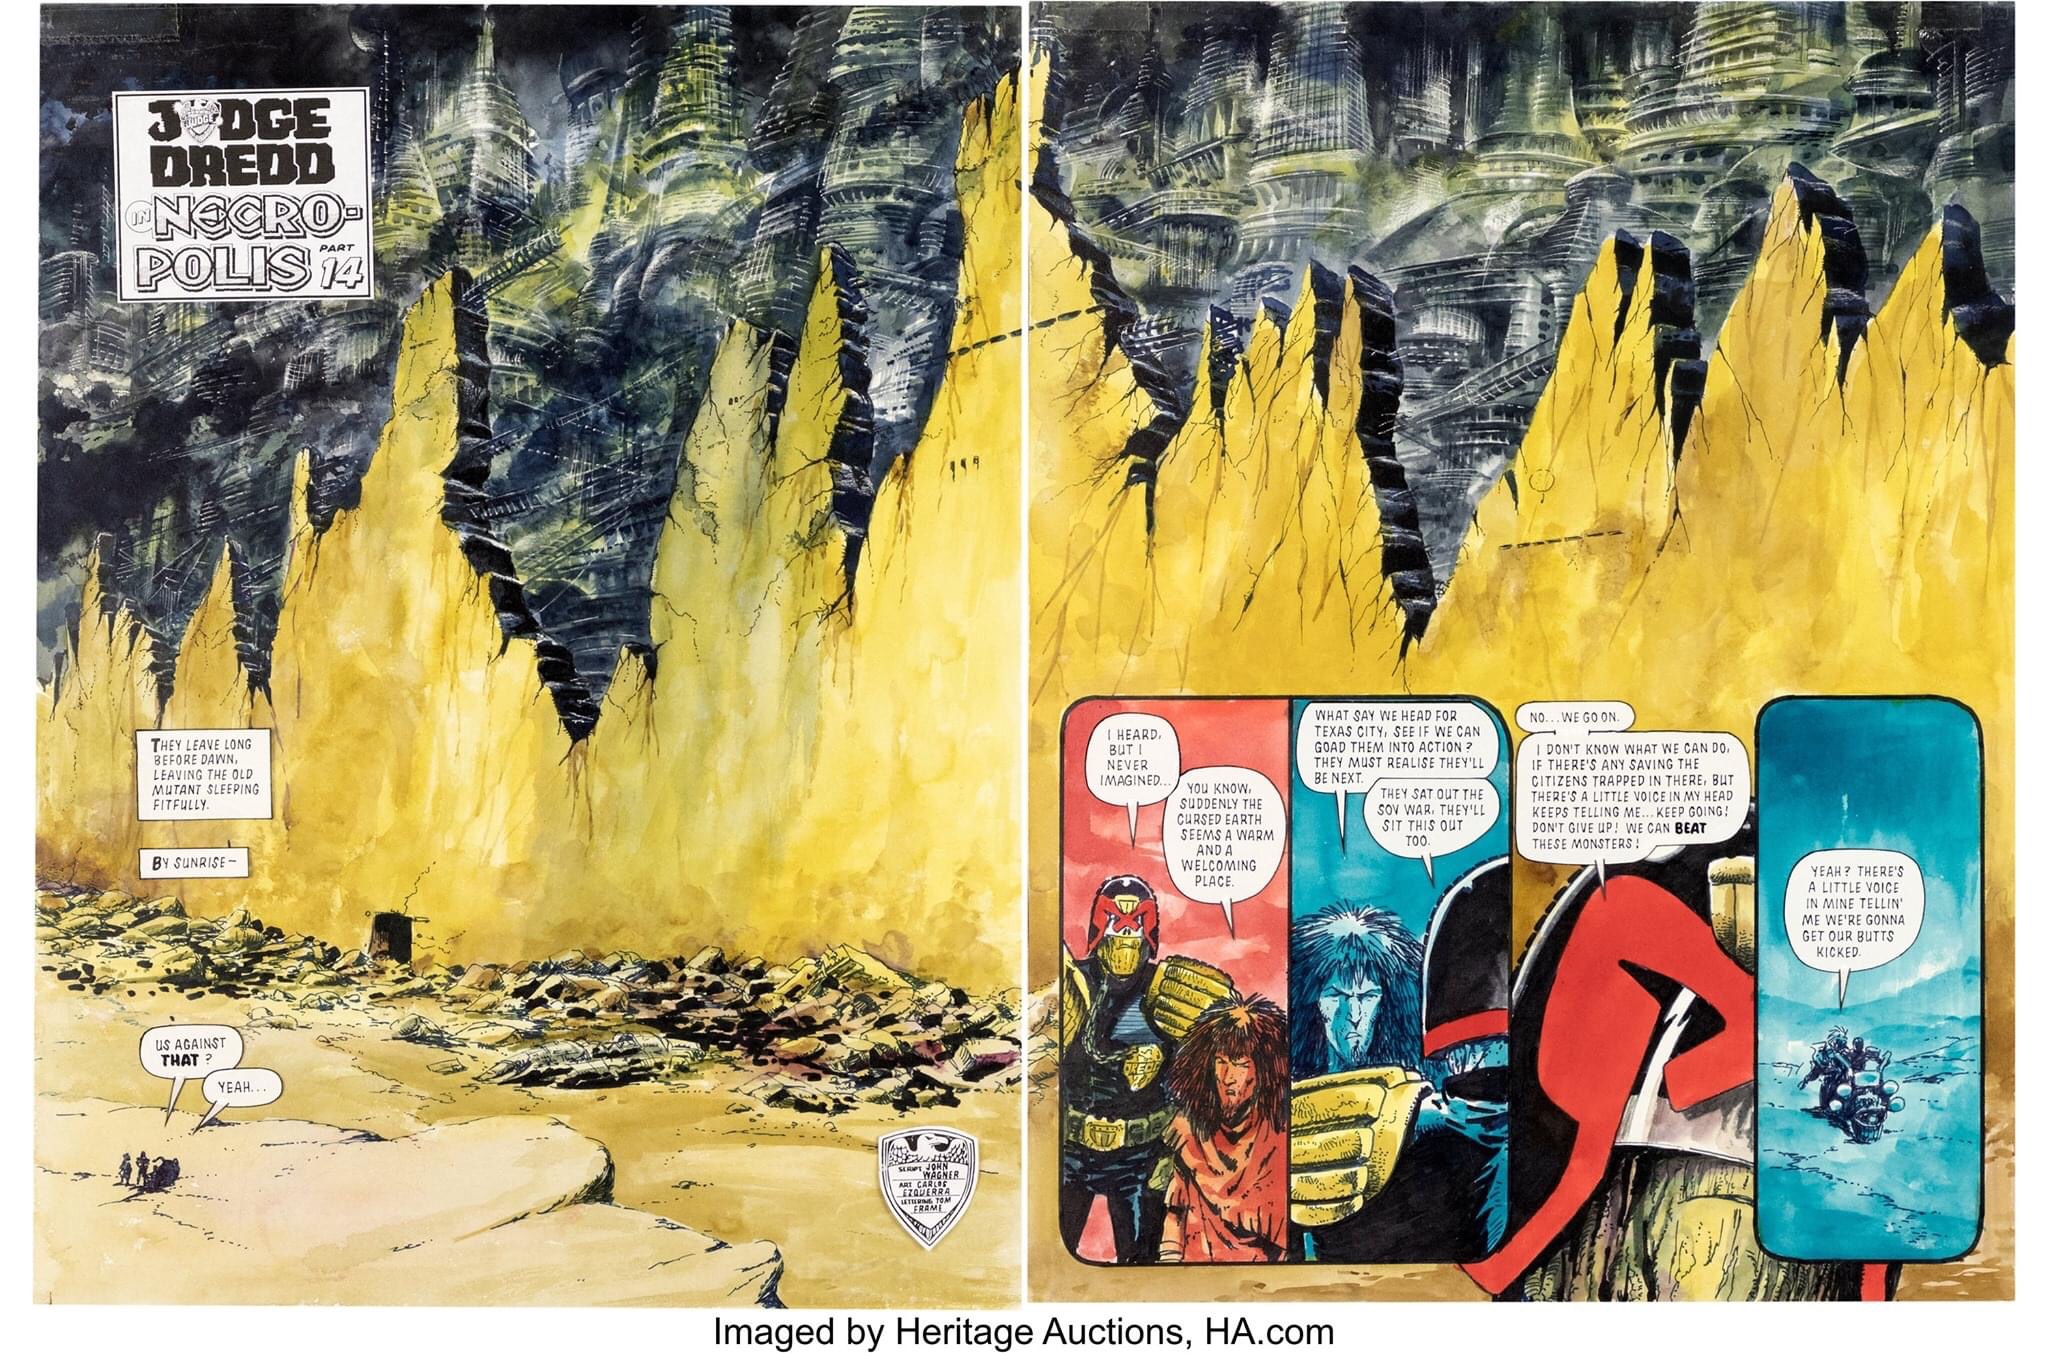 Carlos Ezquerra art for the Judge Dredd story "Necropolis" published in 2000AD Prog 687. Original Art Double Splash Page 12 & 13 (2000AD, 1990). Necropolis was a major turning point in the long-running Democracy story arc. The story also reintroduced the character Judge McGruder, Judge Death and his fellow Dark Judges . It also introduced the "Sisters of Death," saw the deaths of Judge Kraken (Dredd Clone-Brother), Judge Odell, and Chief Judge Silver. Set in the year 2112, the story concerns the tragedy that befalls Mega-City One following the resignation of Judge Dredd in "Tale of the Dead Man". Don't be fooled this DPS by the hand of legend Carlos Ezquerra is THE ultimate DPS of Necropolis. Mixed media on Bristol paper with a large image area of 26.5" x 18". 2000 AD stamp on the back. The bubbles are affixed to a transparent acetates. In Excellent Condition. From the Ezquerra Collection